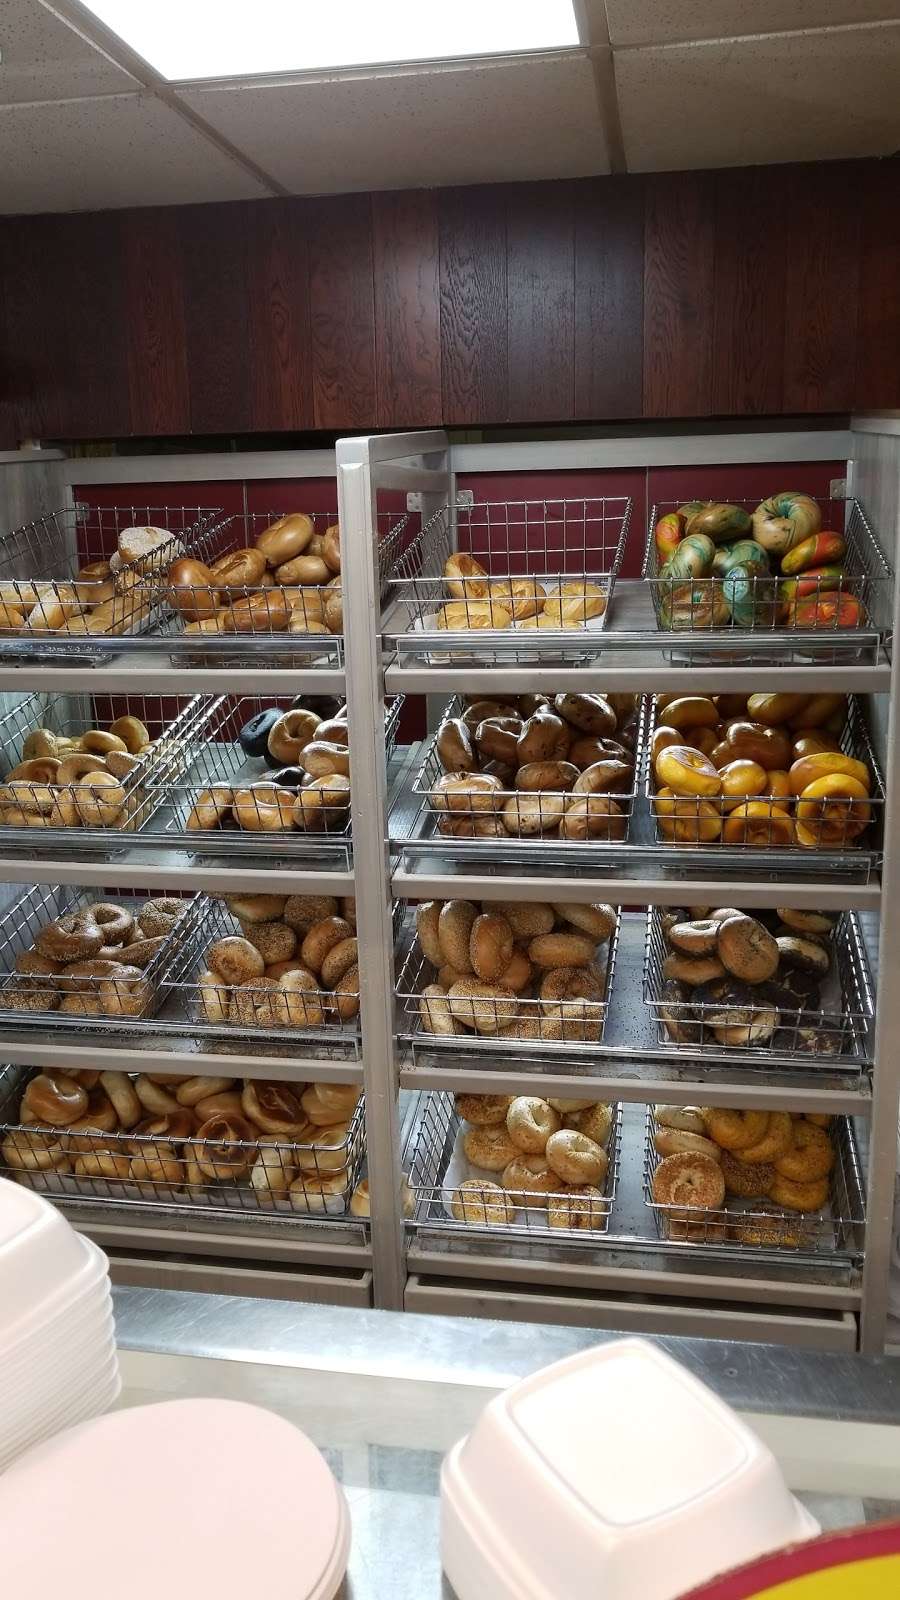 Tottenville Bagels Inc | 6959 Amboy Rd, Staten Island, NY 10309 | Phone: (718) 984-7052